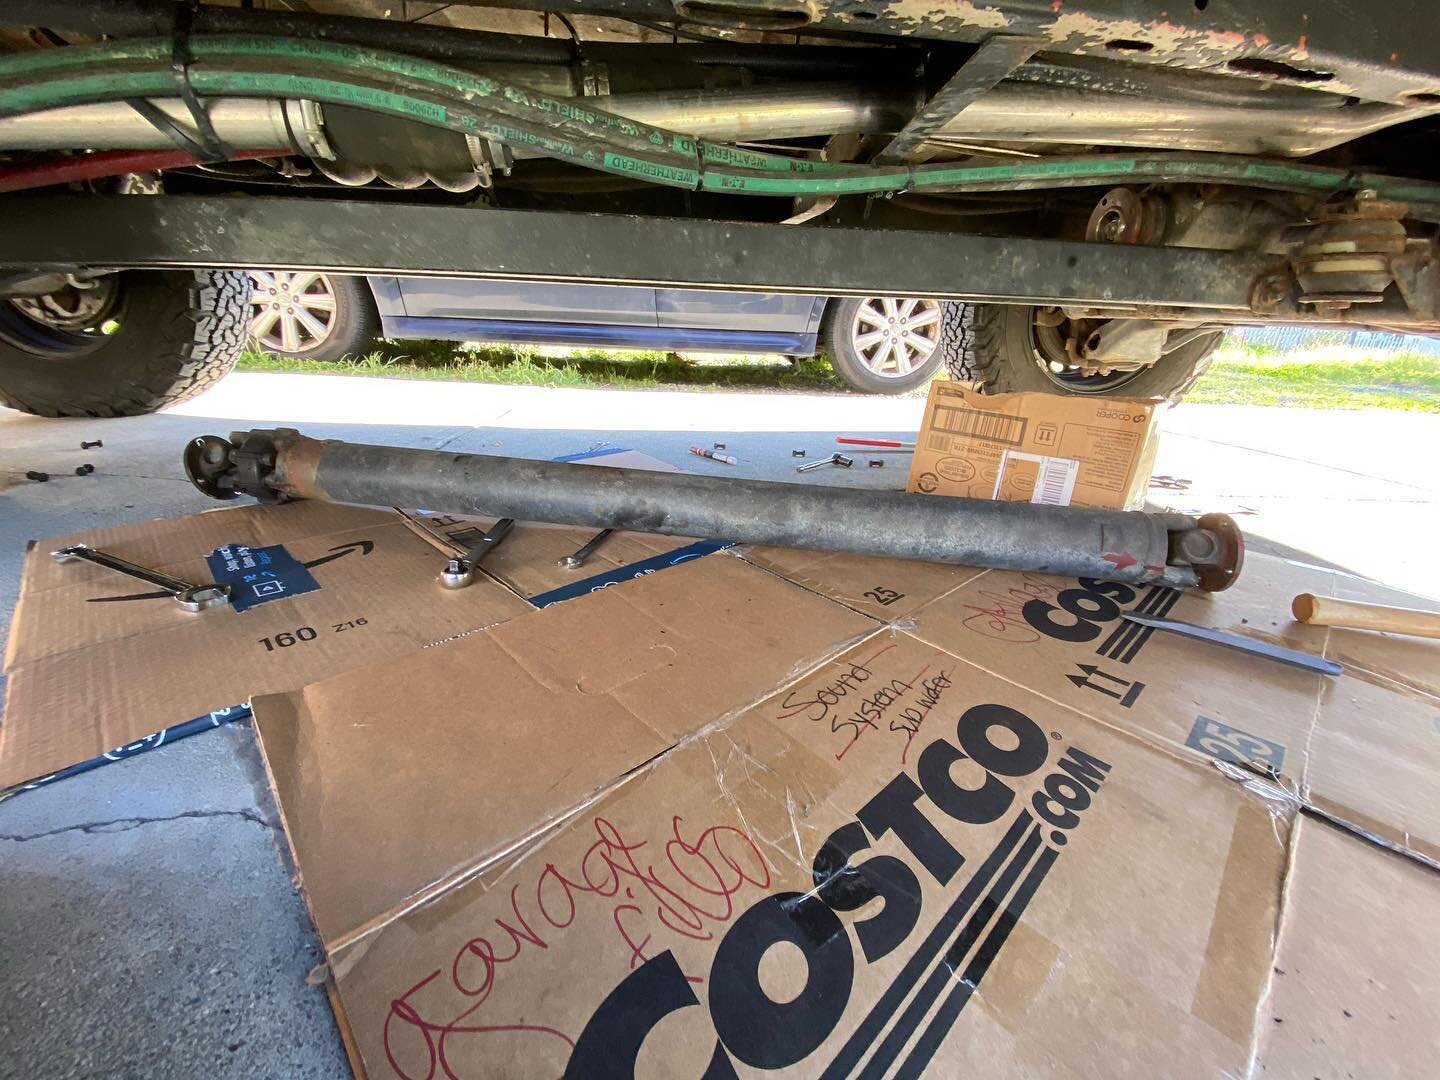 Bad vibes.  Yep rear unjoint died and the front could feel better.  Going to try 318 replacement ujoint parts and try to make a 90 zerk fit for easy access later.  And repack grease to the inner bushing at the doughnut. Anyone have luck doing so???